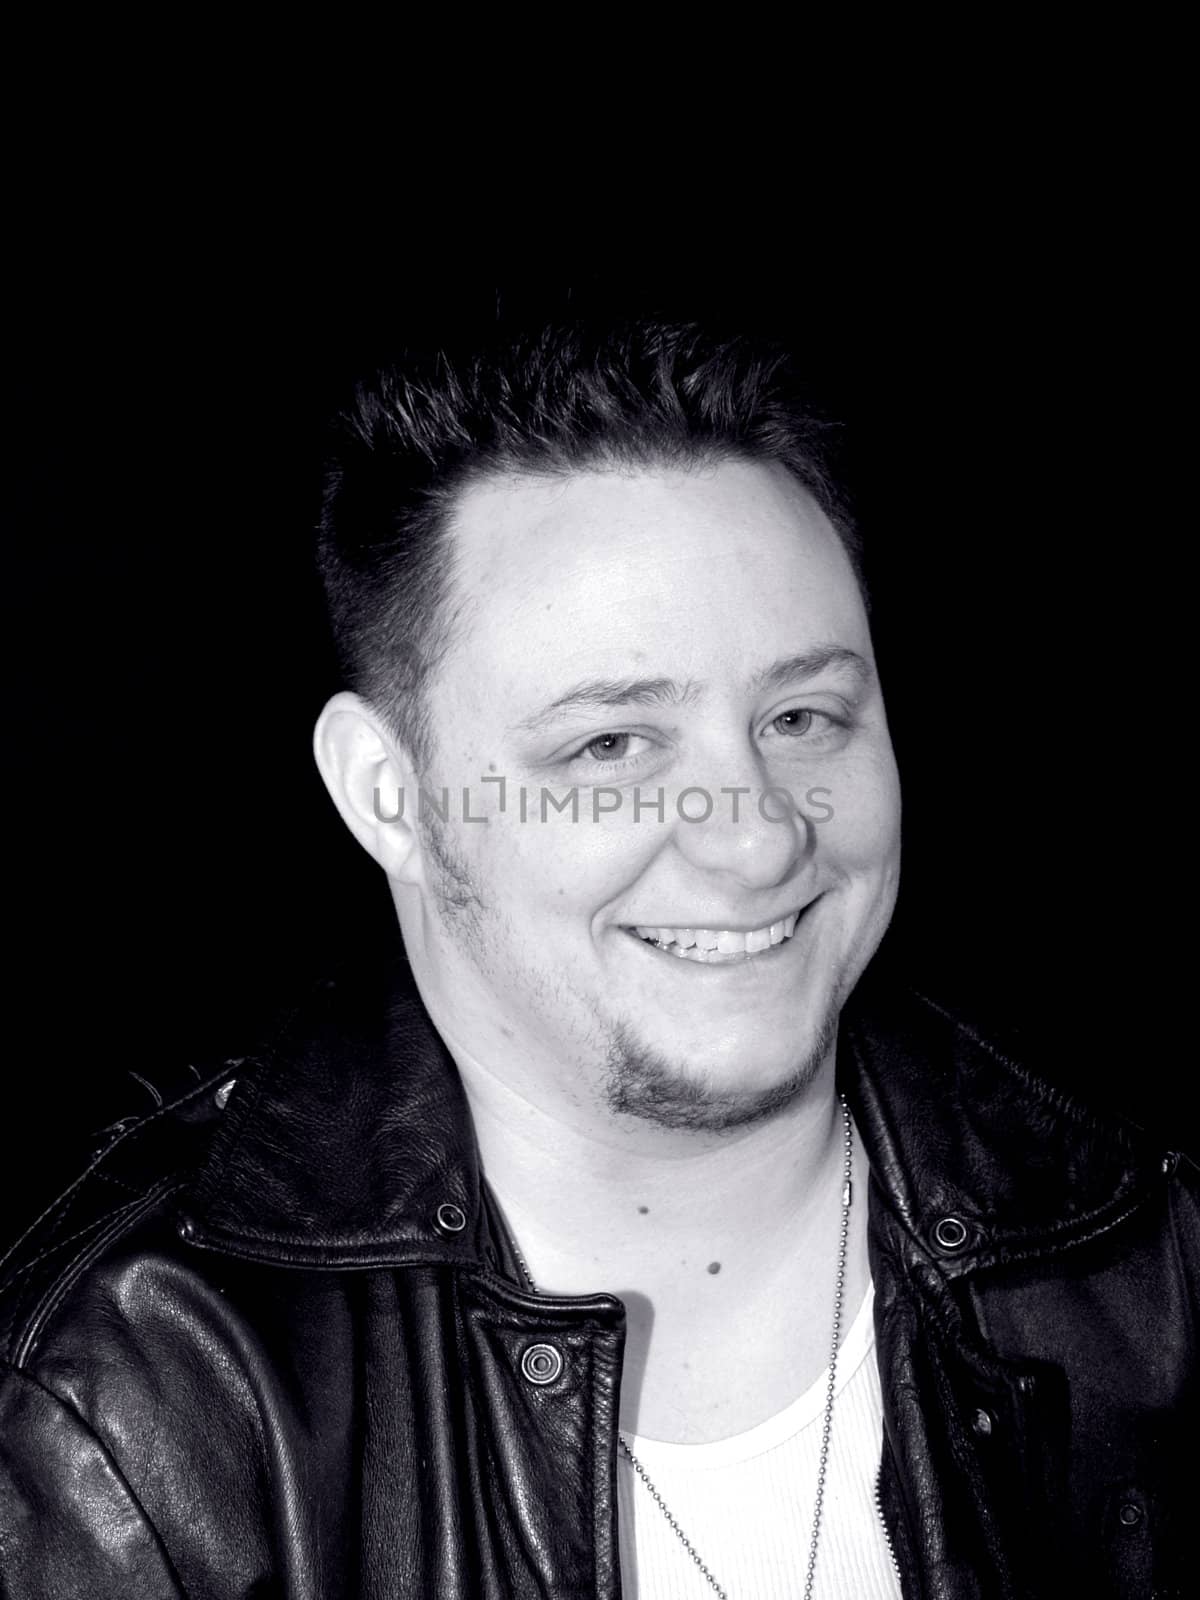 a man in a leather jacket smiling in black and white.